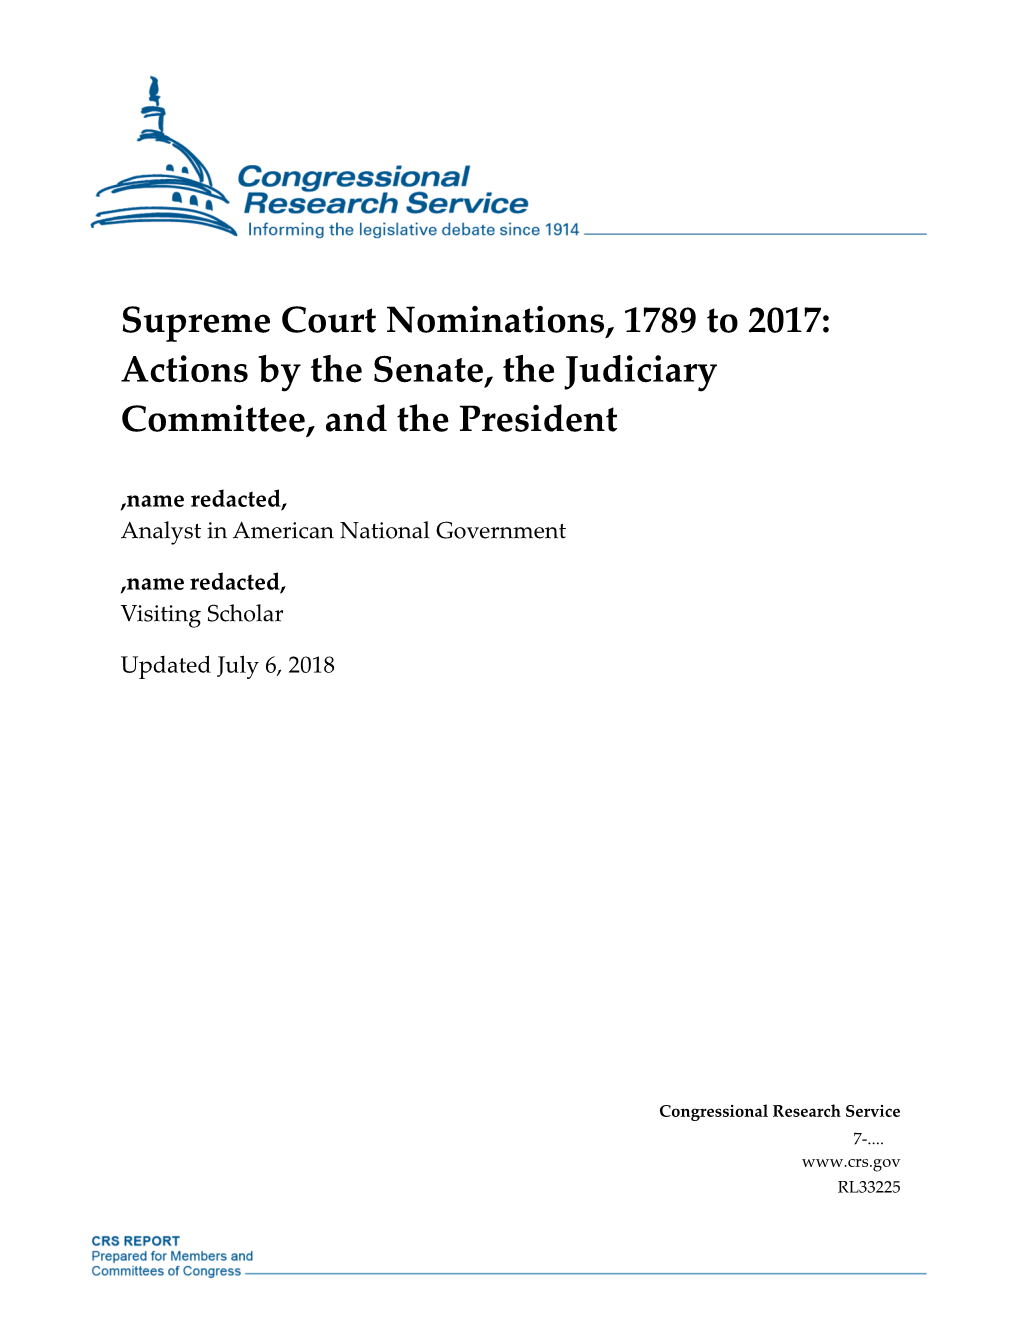 Supreme Court Nominations, 1789 to 2017: Actions by the Senate, the Judiciary Committee, and the President